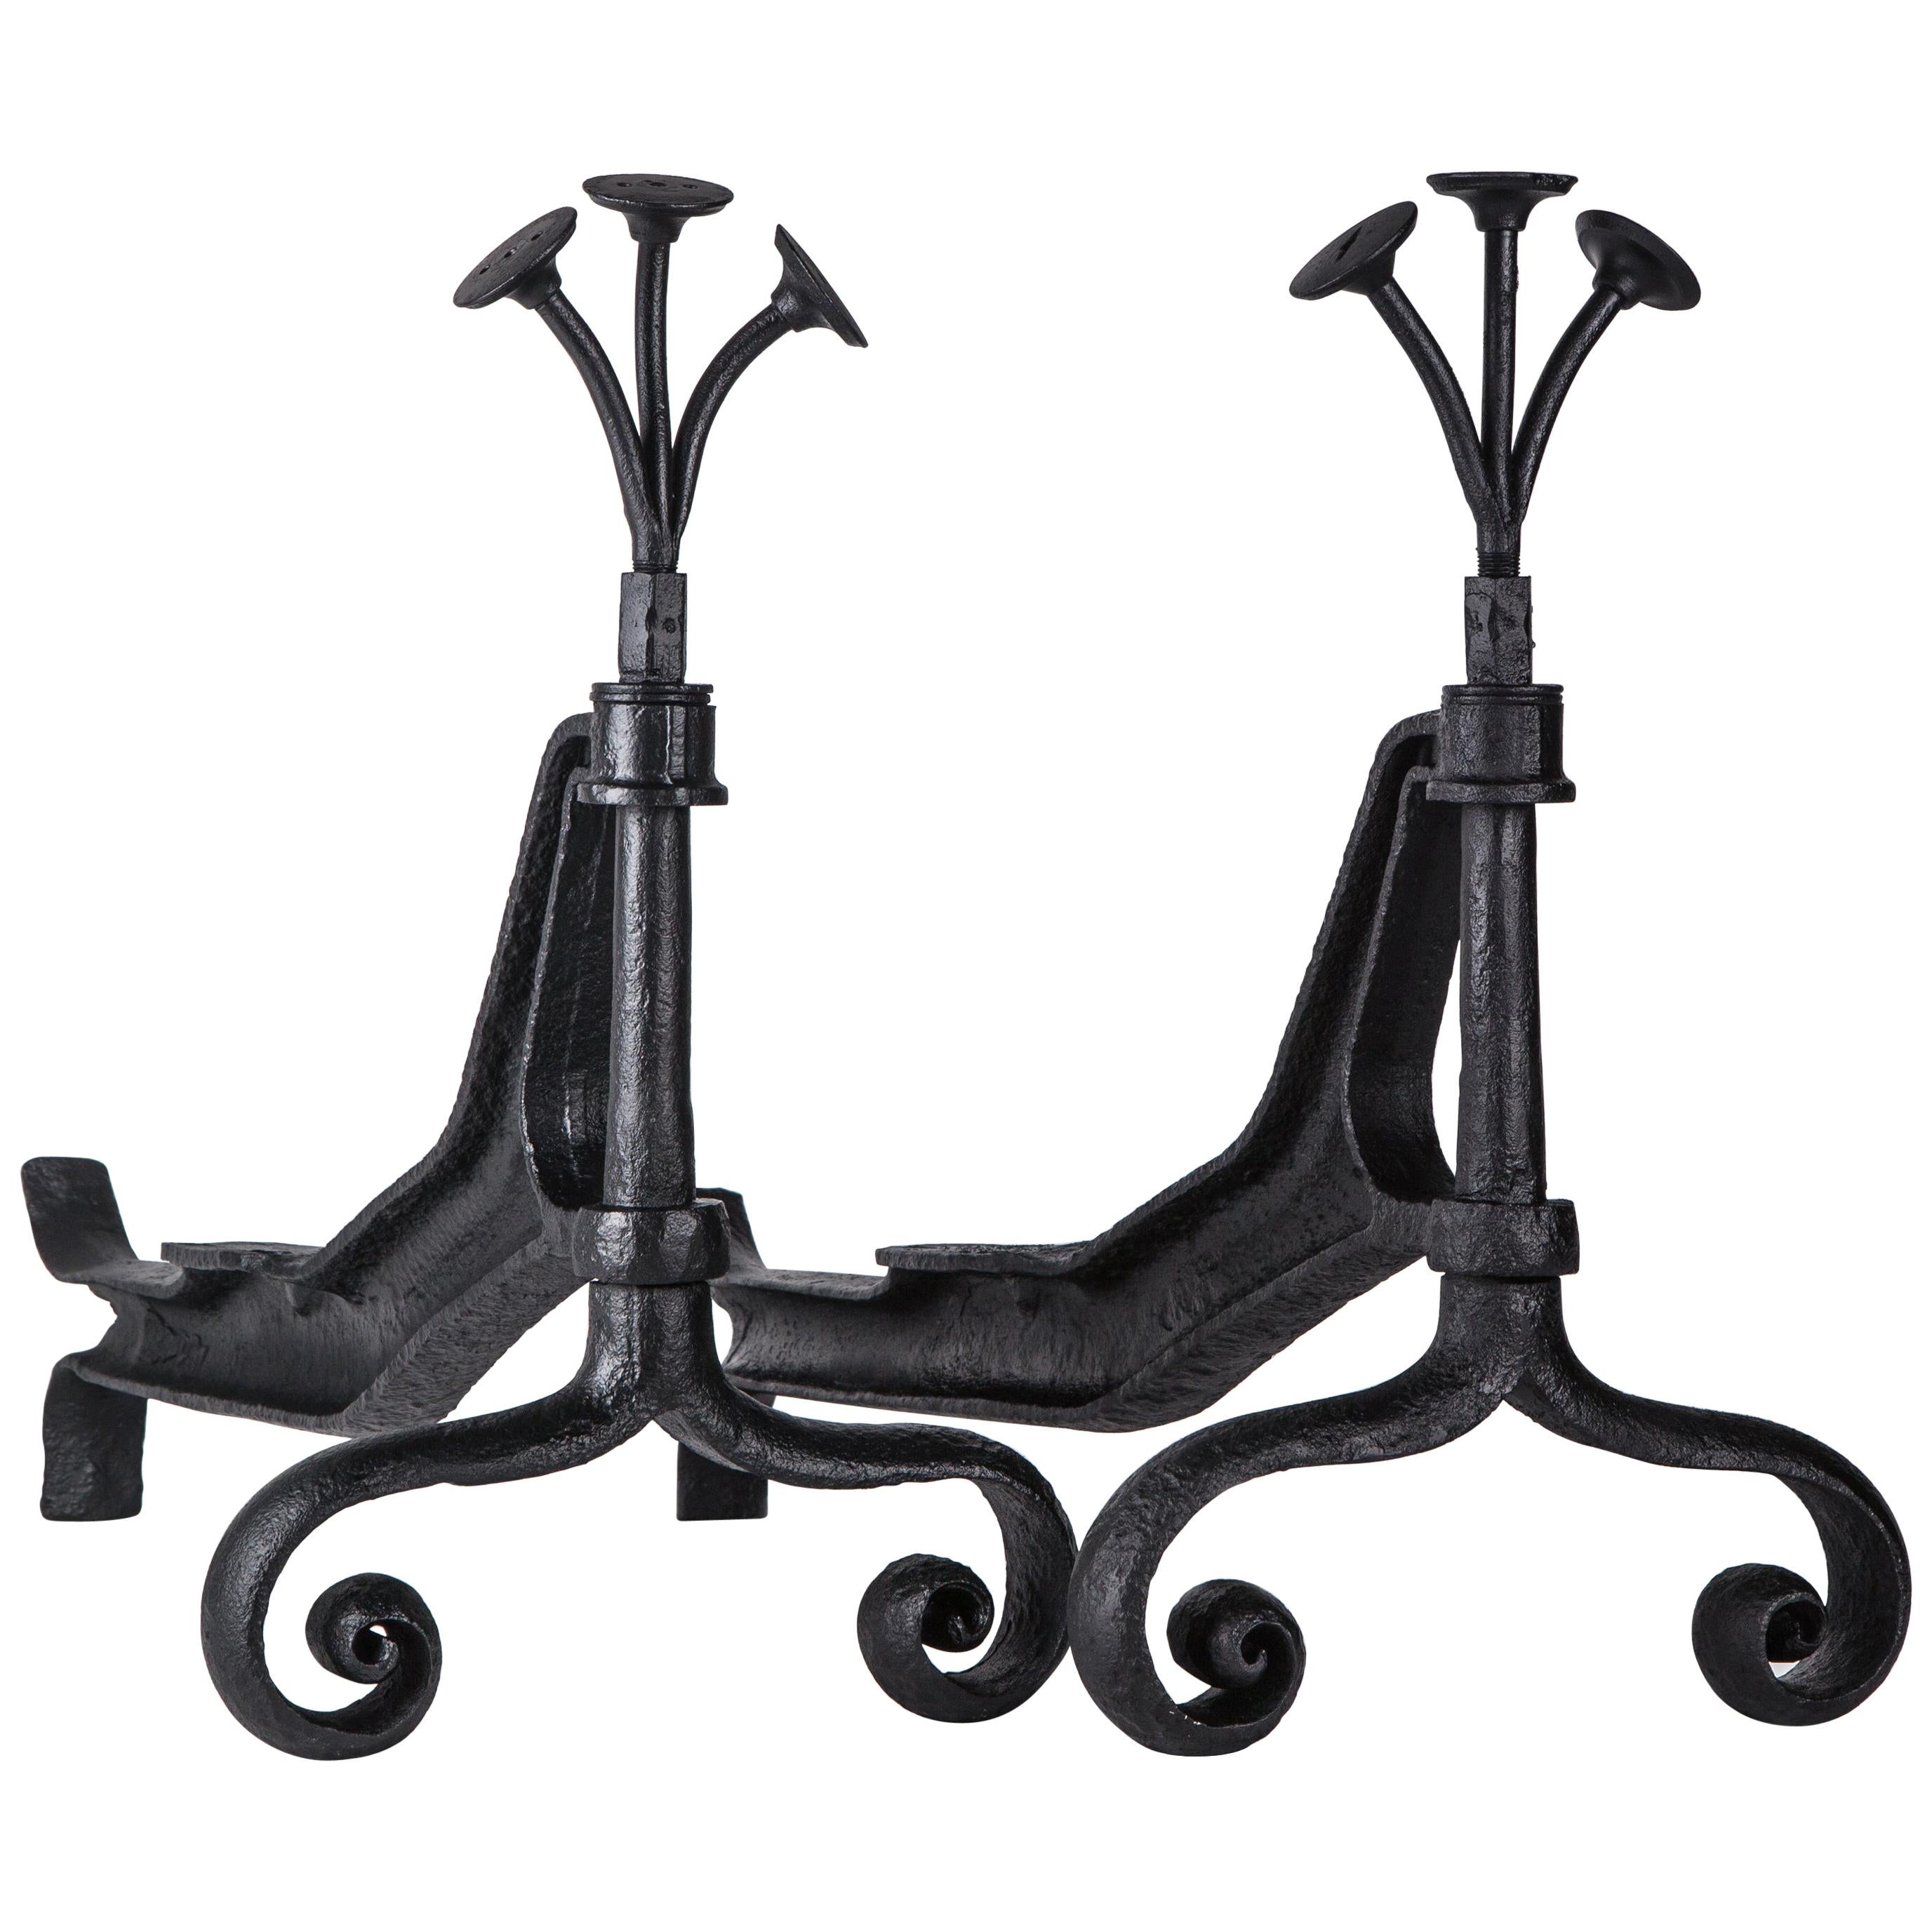 Folk Art Industrial Forged and Blackened Iron Andirons with Scroll Feet, c. 1940